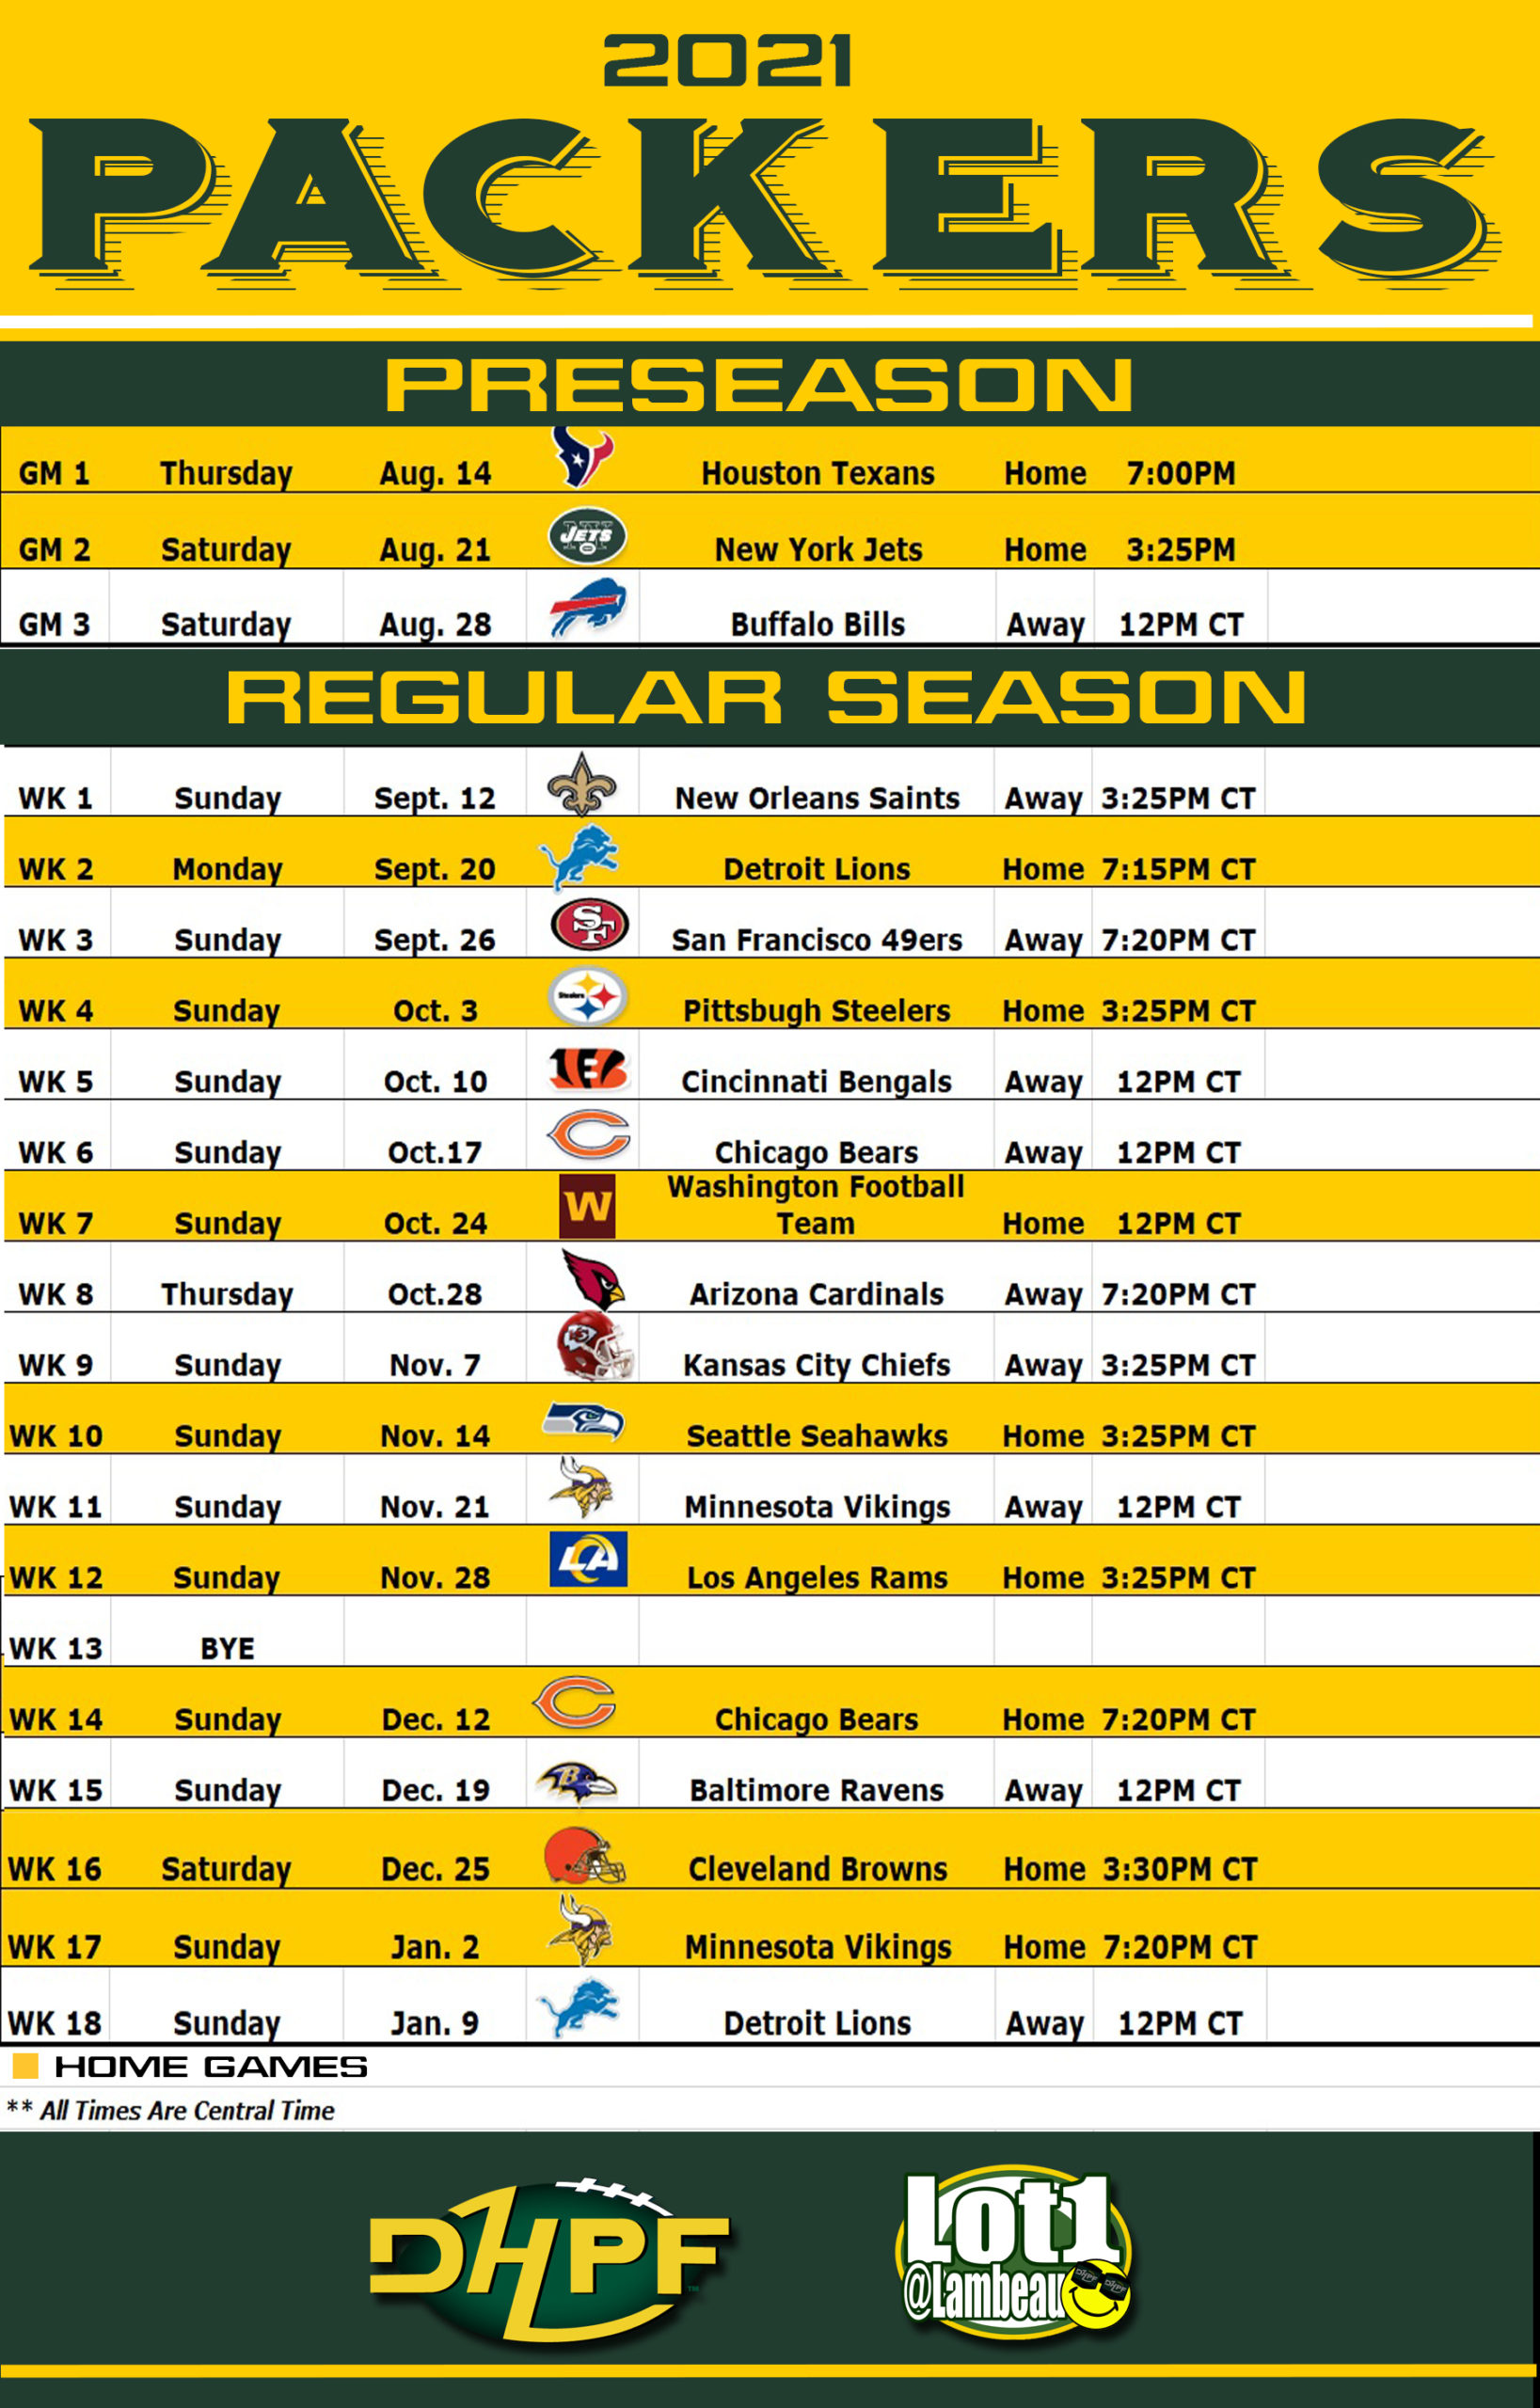 the-packers-2021-22-schedule-and-thoughts-die-hard-packer-fan